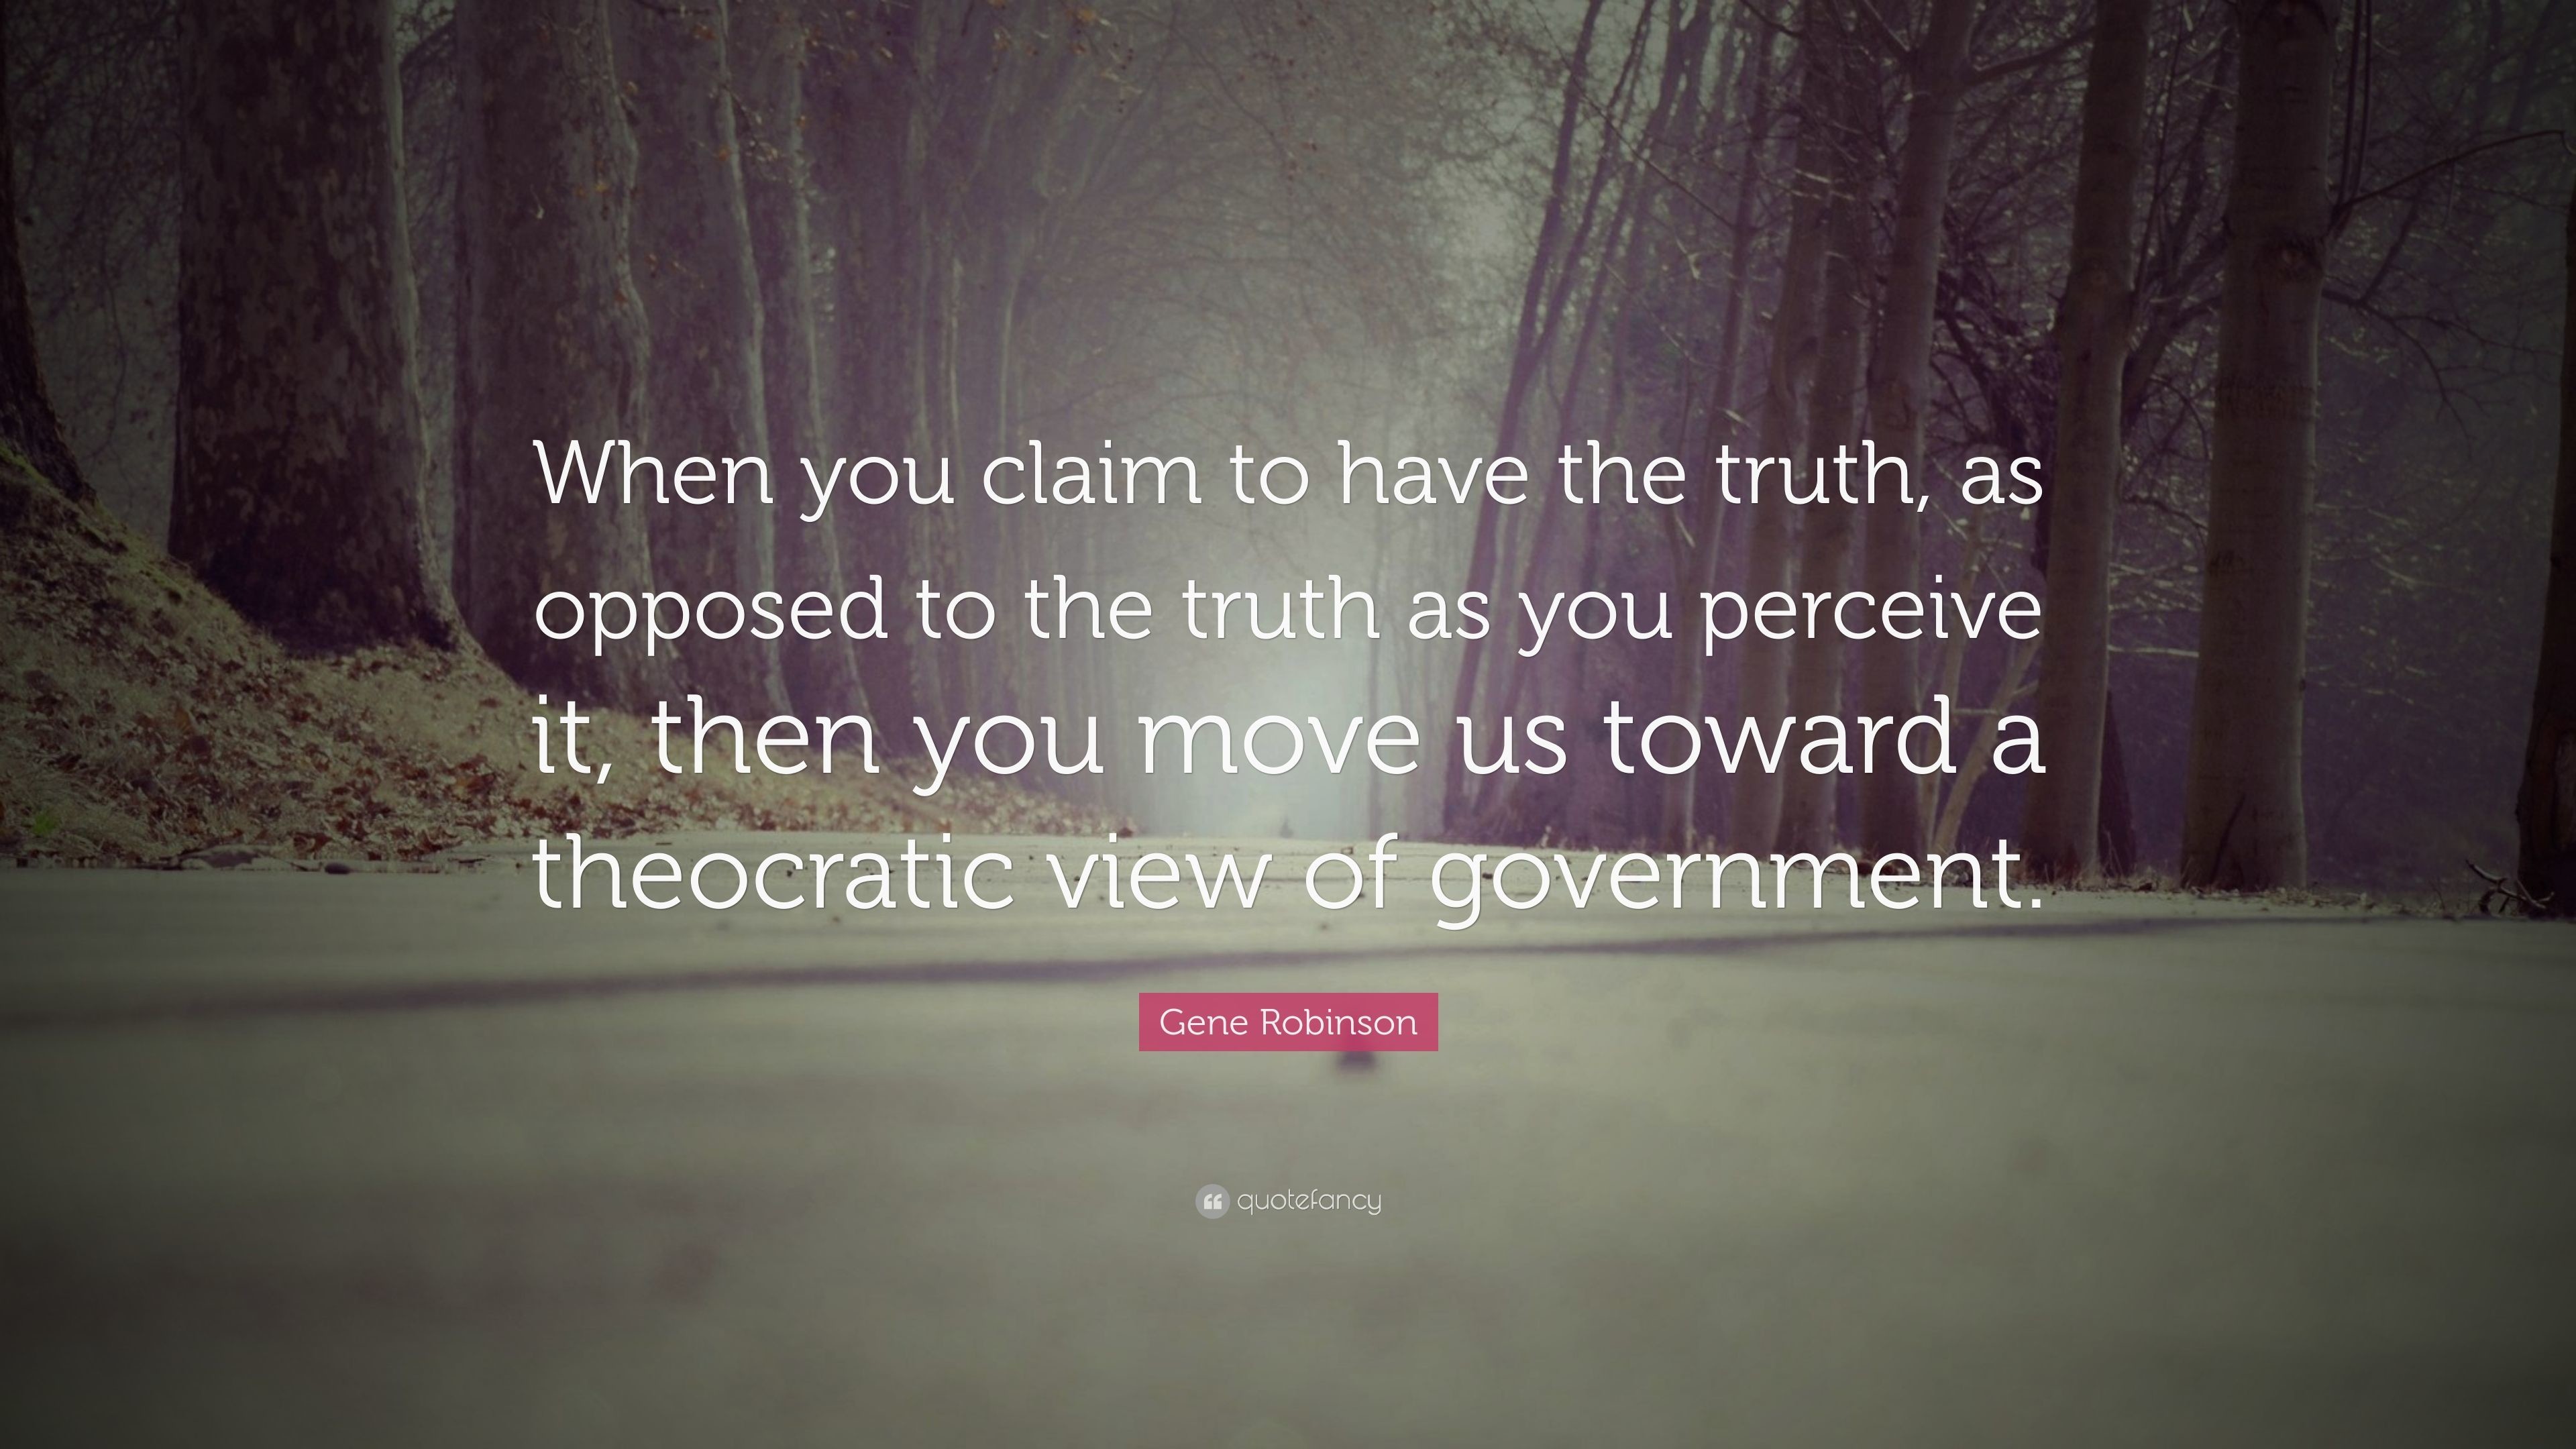 3840x2160 Gene Robinson Quote: “When you claim to have the truth, as opposed to